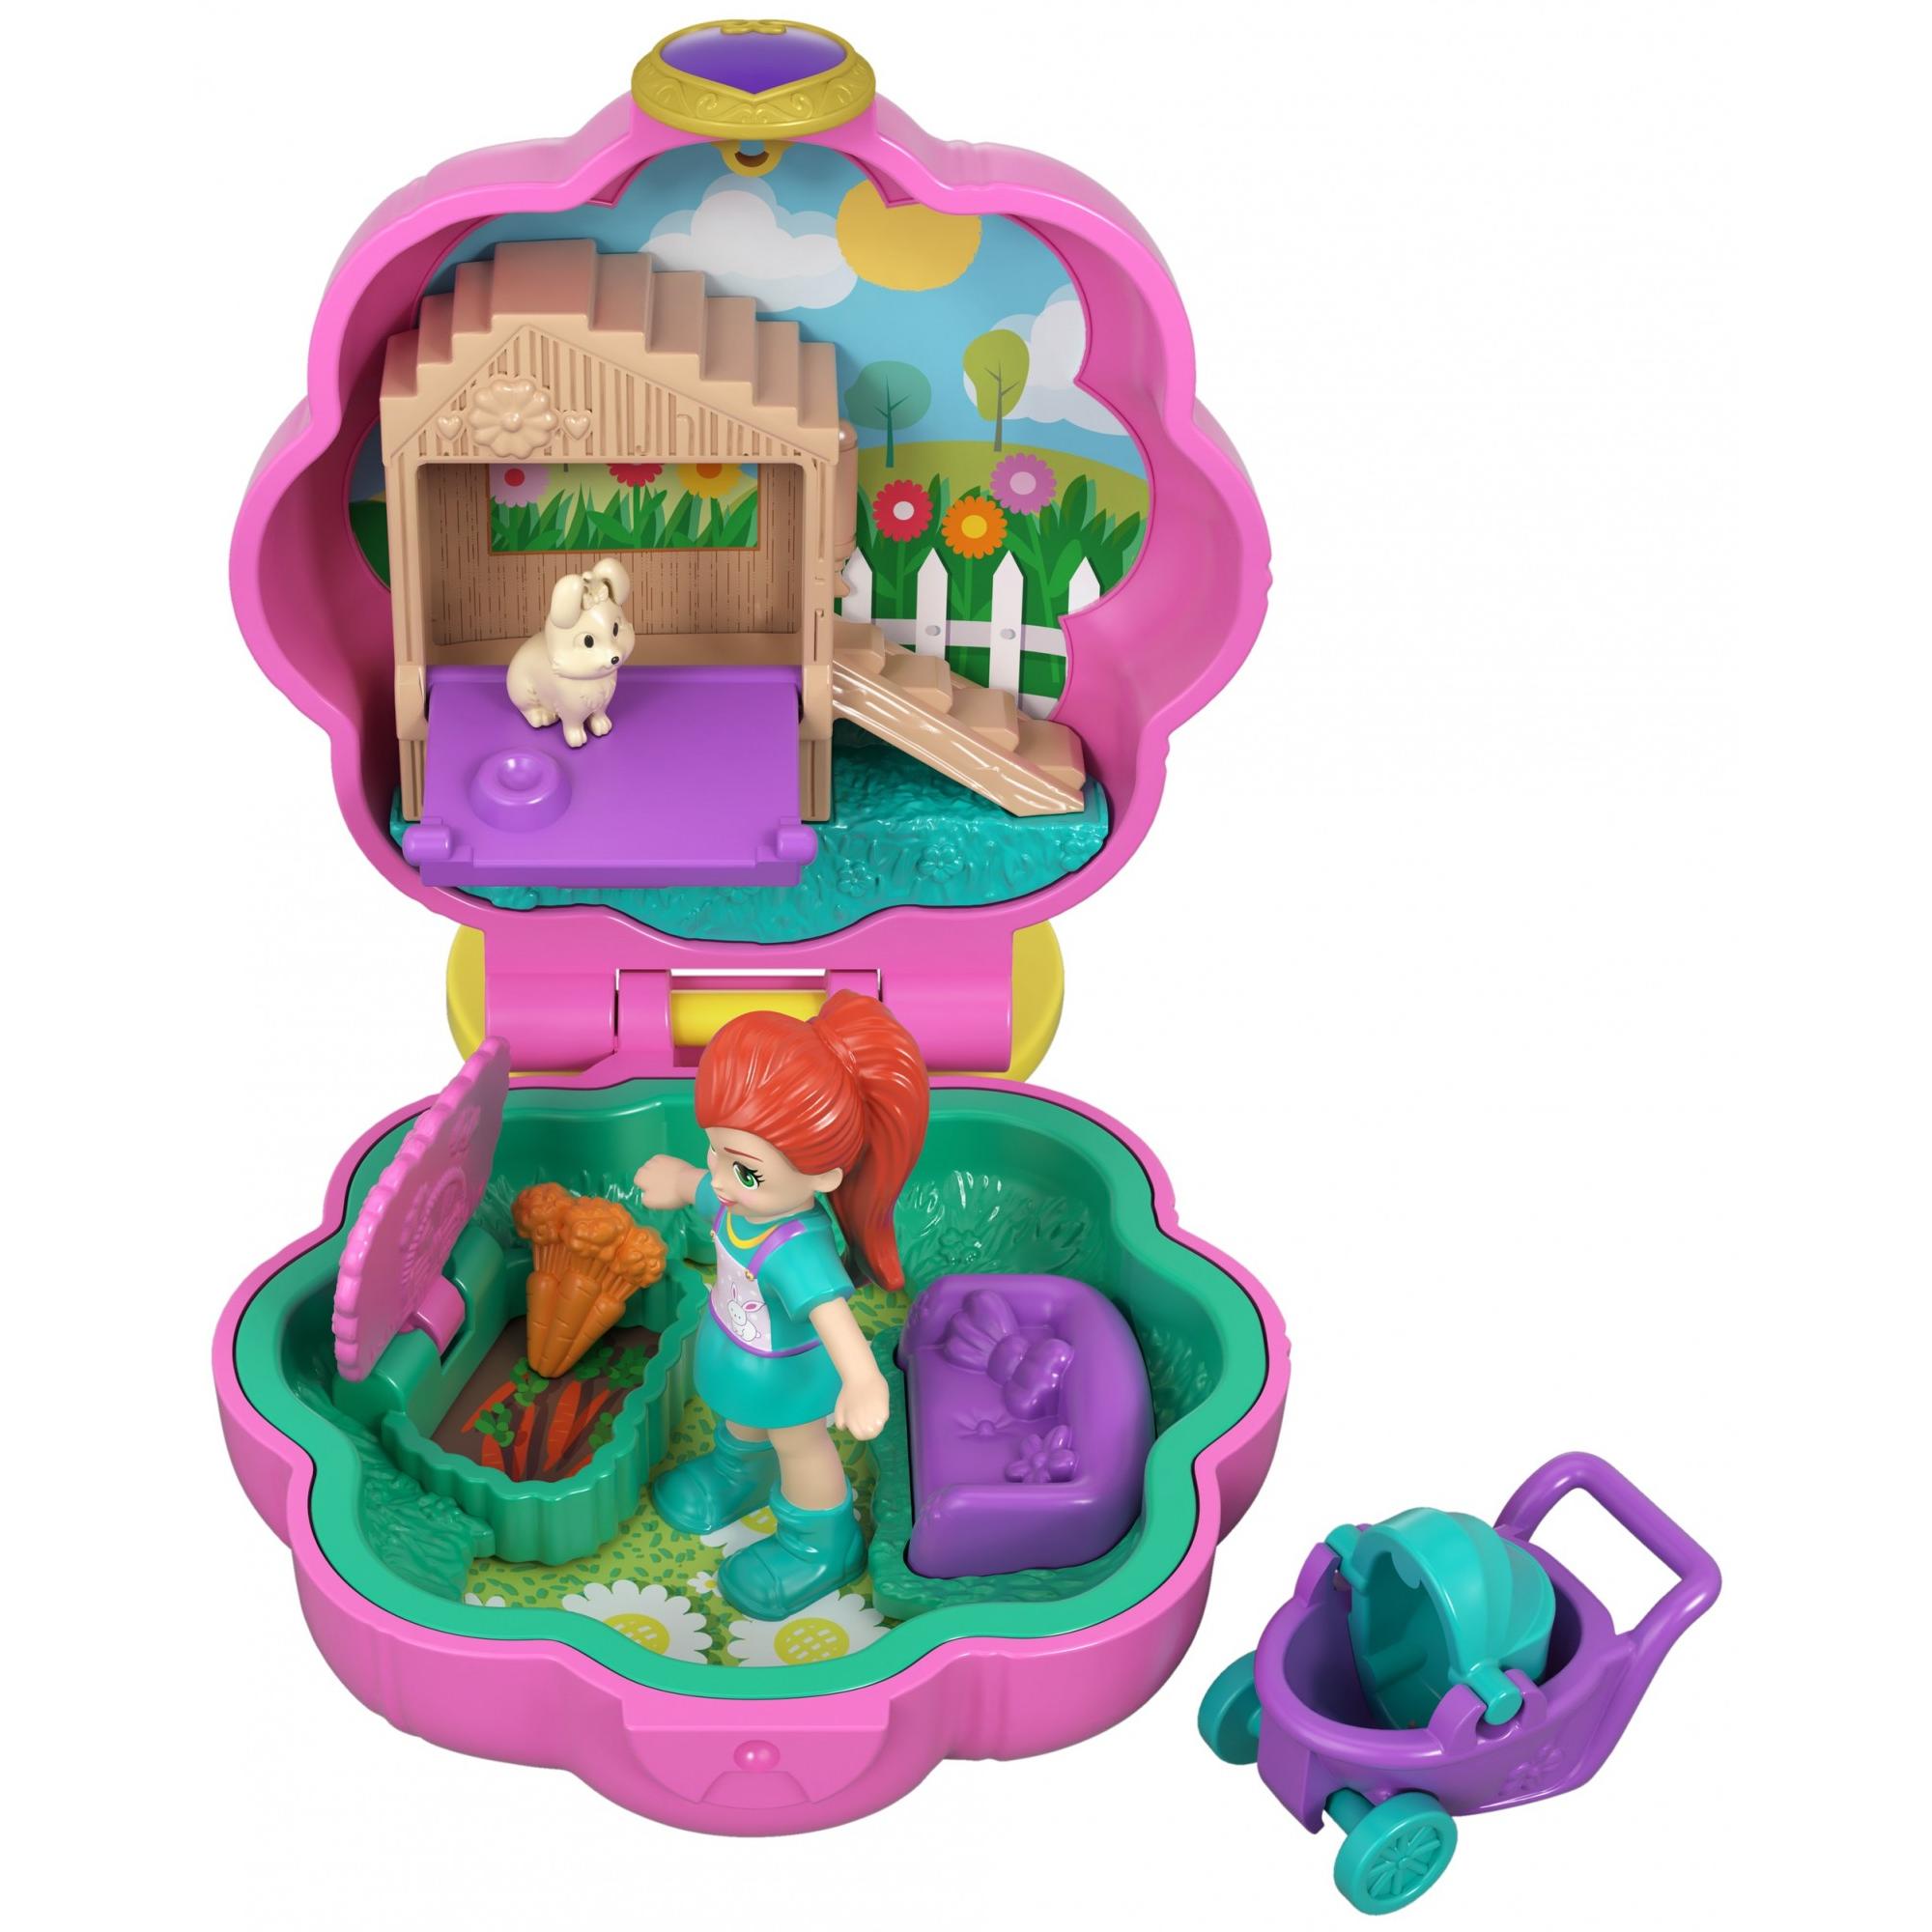 Polly Pocket Tiny Pocket Places Lila Pet Compact with Doll - image 3 of 7